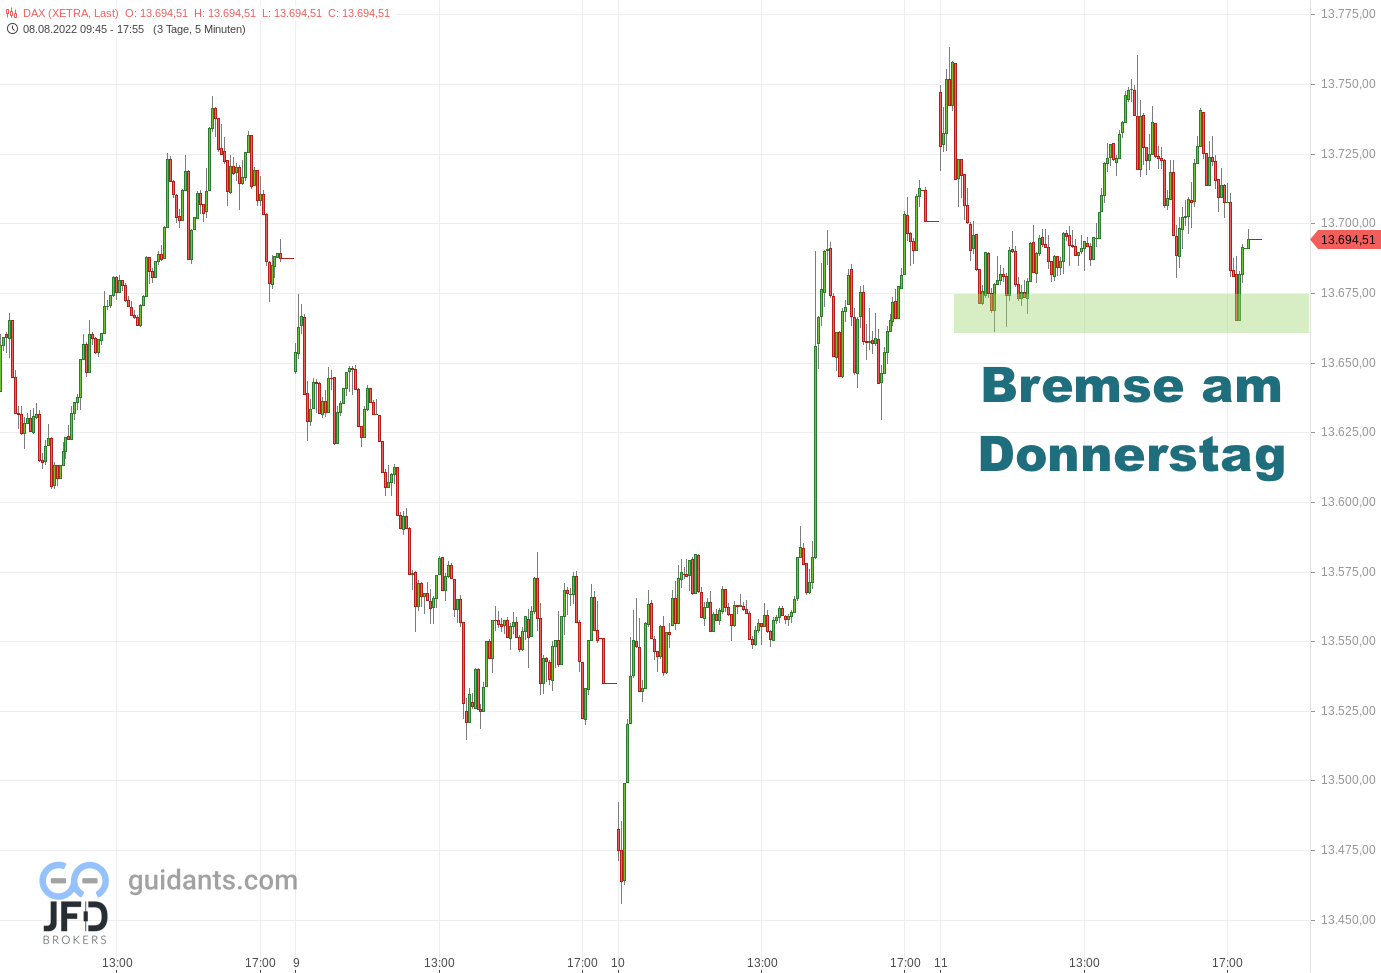 20220811 DAX-Xetra Donnerstag